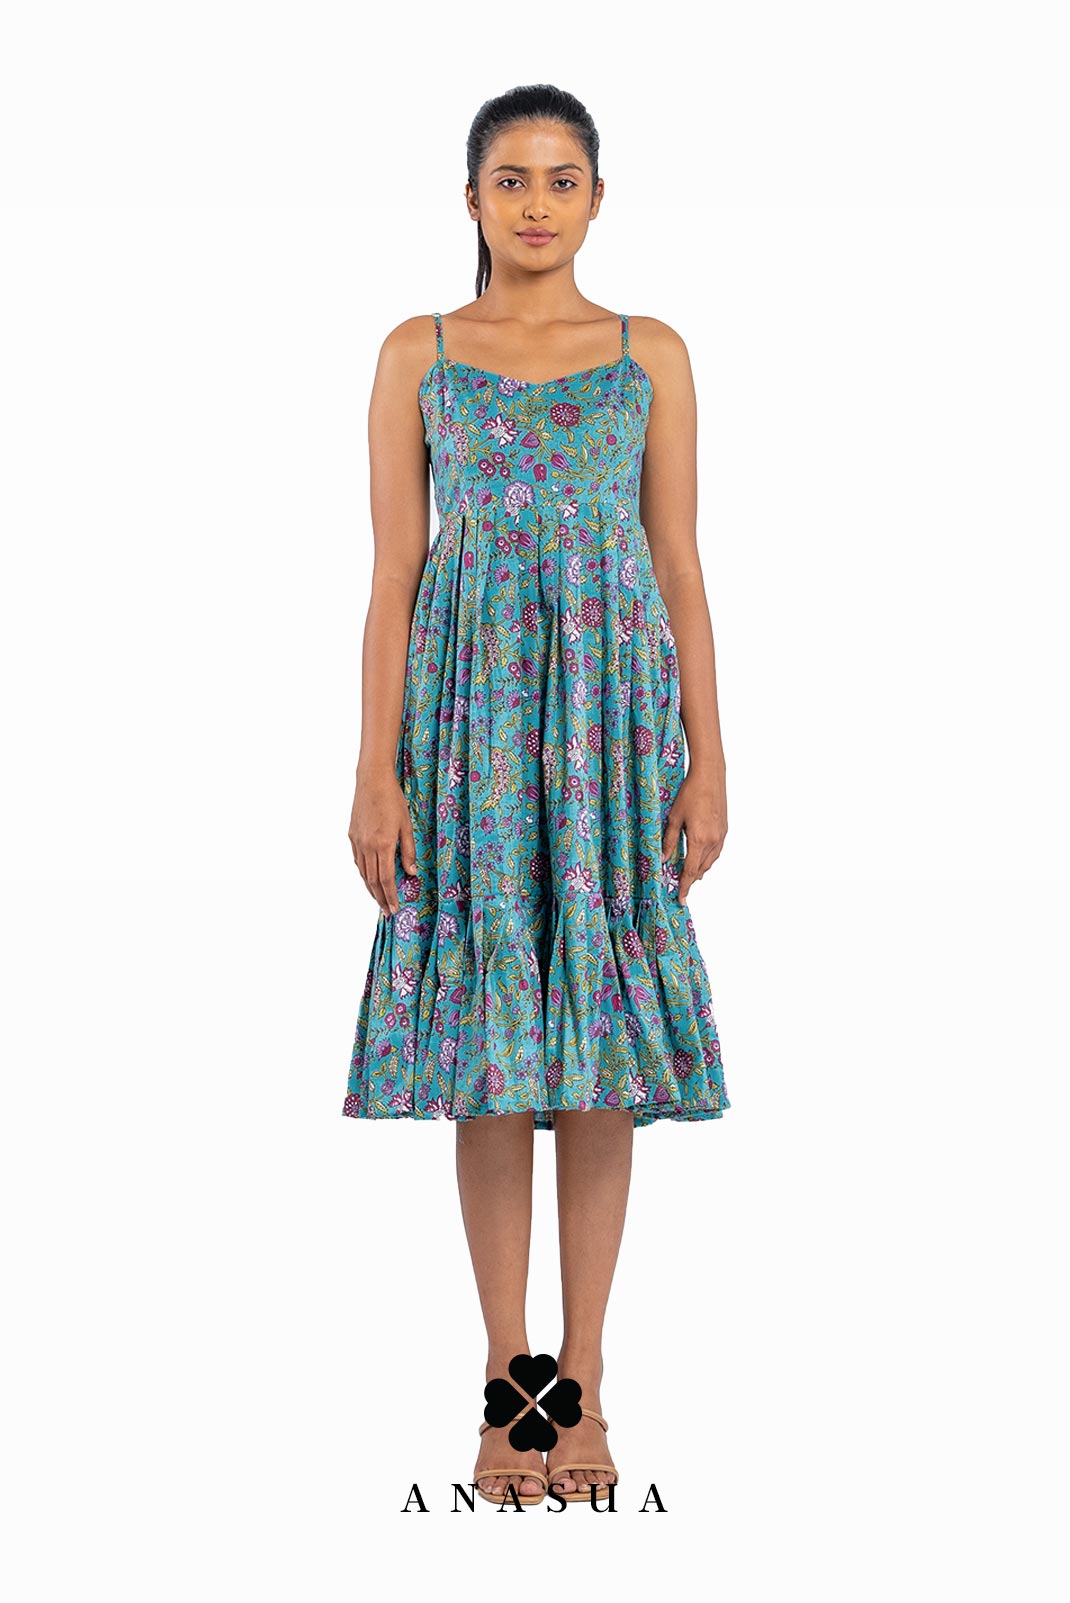 spaghetti strap midi sundress in turquoise floral print front view 3449062d 3050 407c 85e3